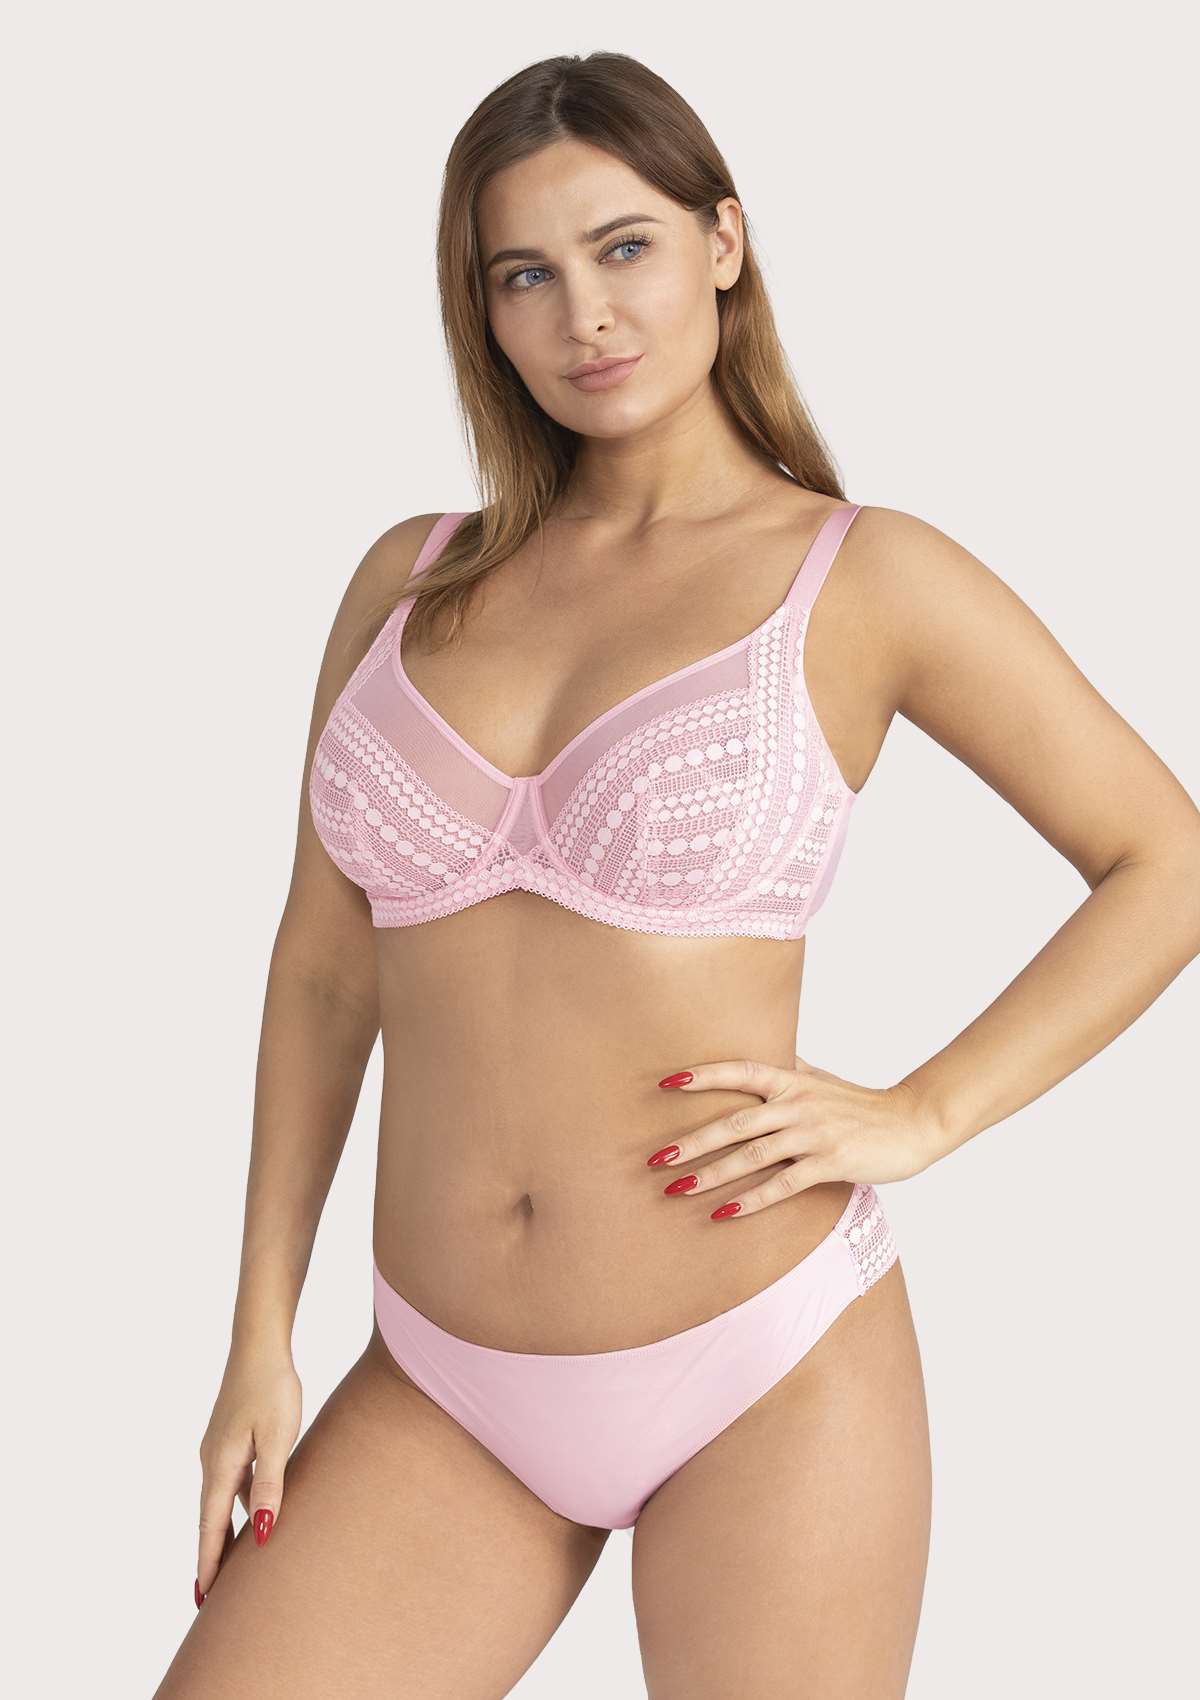 HSIA Heroine Lace Bra And Panties Set: Most Comfortable Supportive Bra - Pink / 34 / DD/E